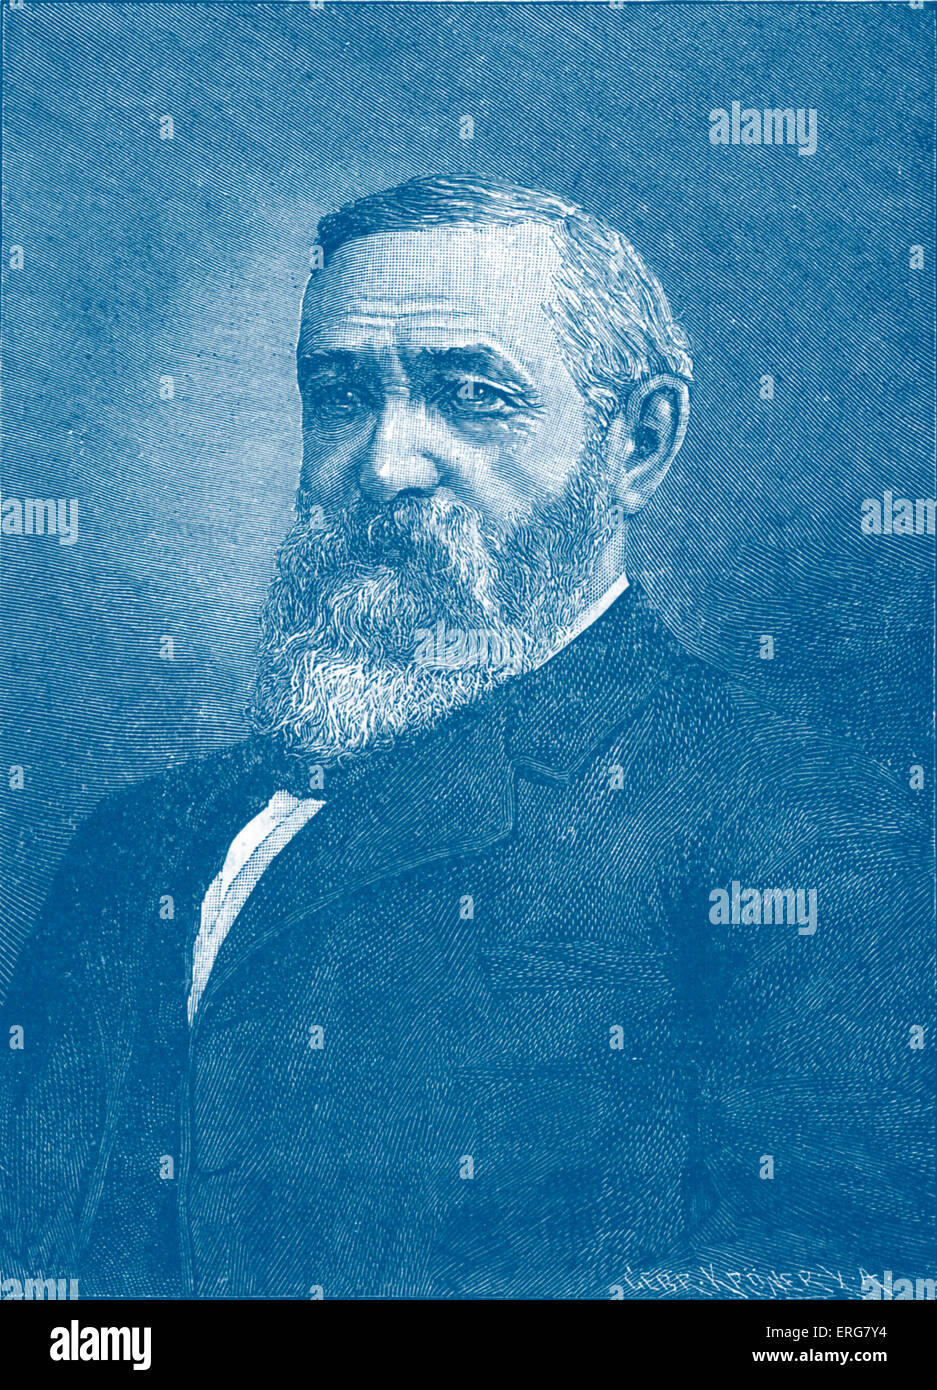 Benjamin Harrison, 23rd President of the United States of America. Republican, served one term from 1889 to 1893. 20 August Stock Photo